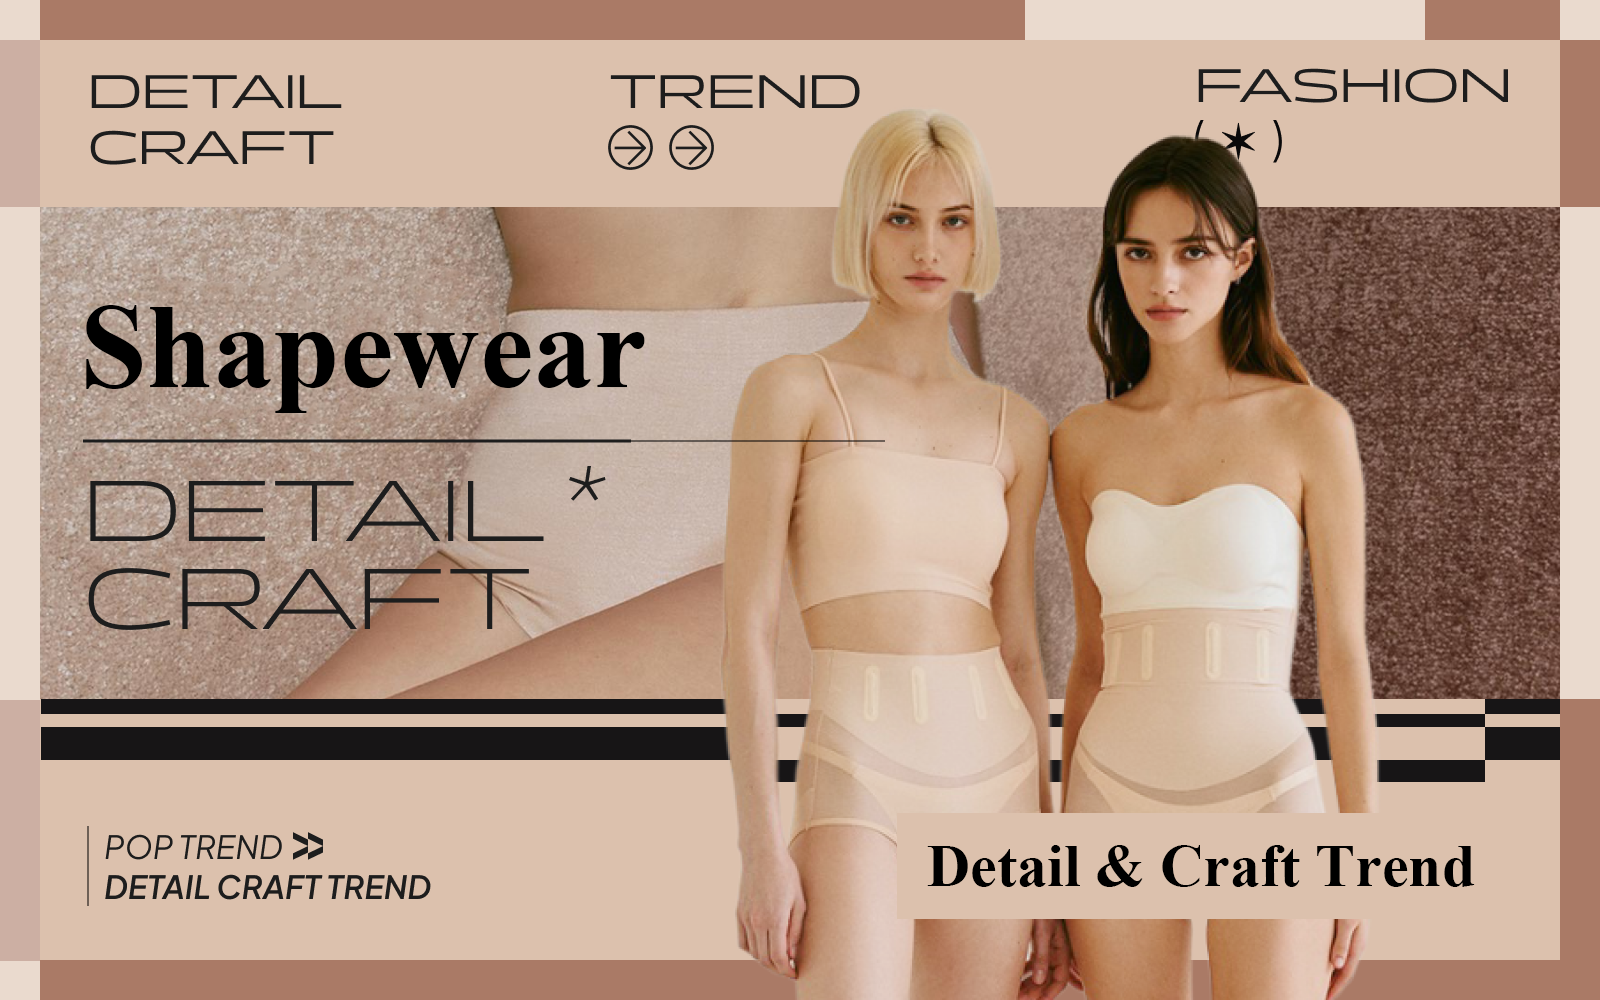 The Detail & Craft Trend for Women's Shapewear